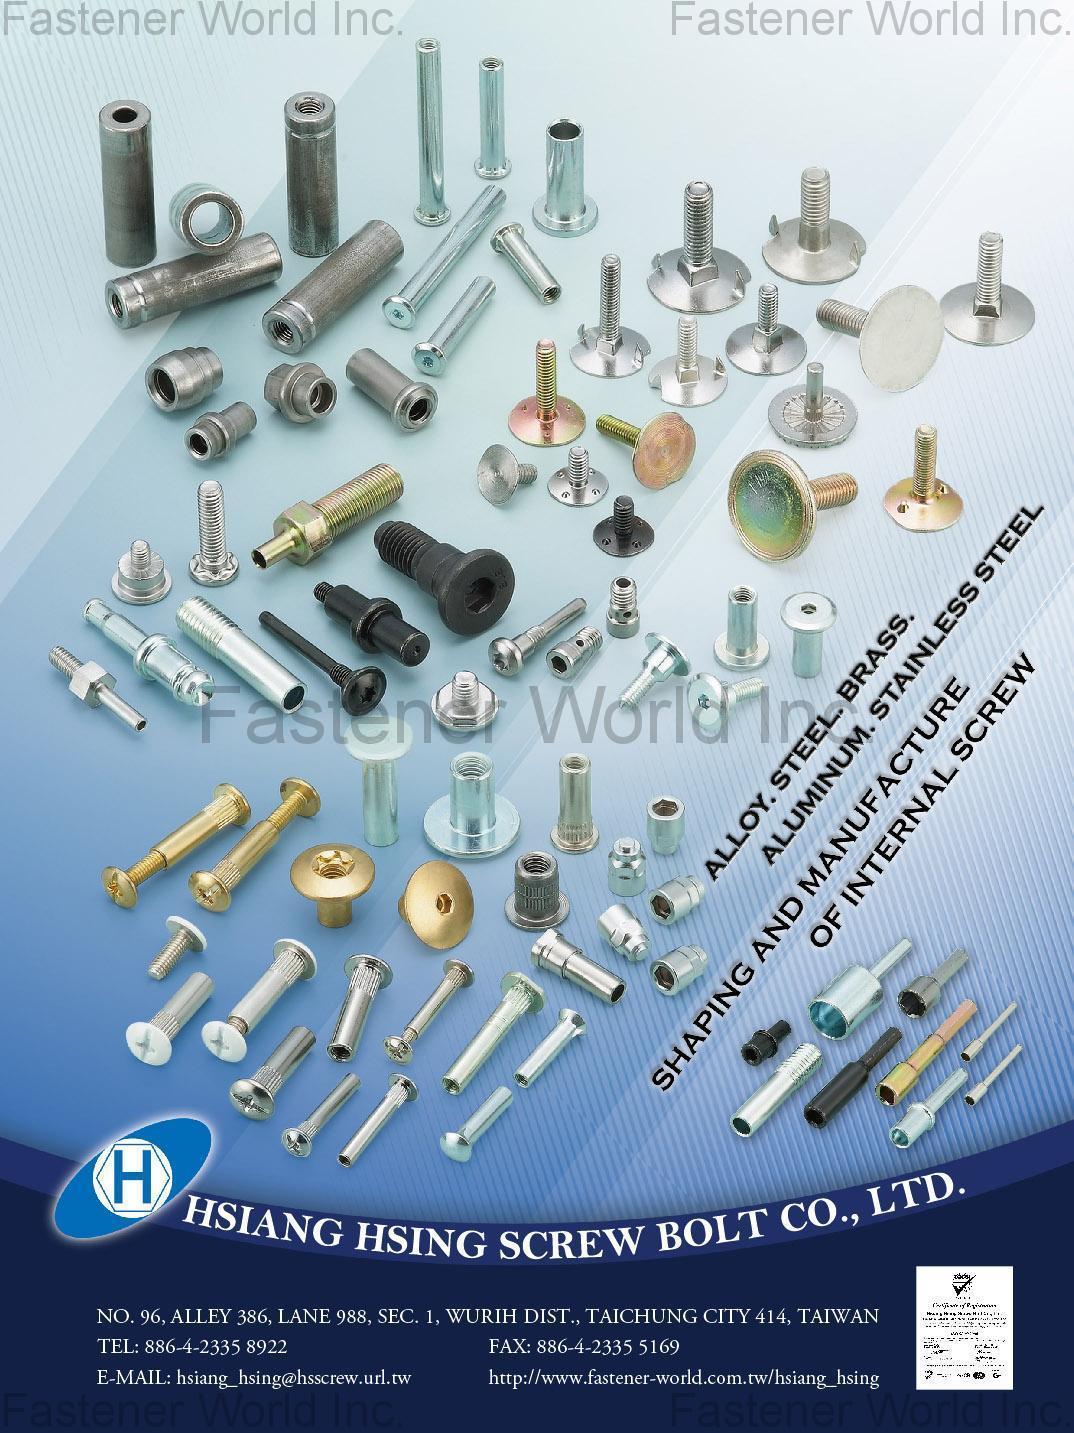 HSIANG HSING SCREW BOLT CO., LTD.  , Cold Forged Parts, Elevator Bolt, Screw For Furniture, Bolt & Amp. Nuts, Concrete Screw , Special Bolts